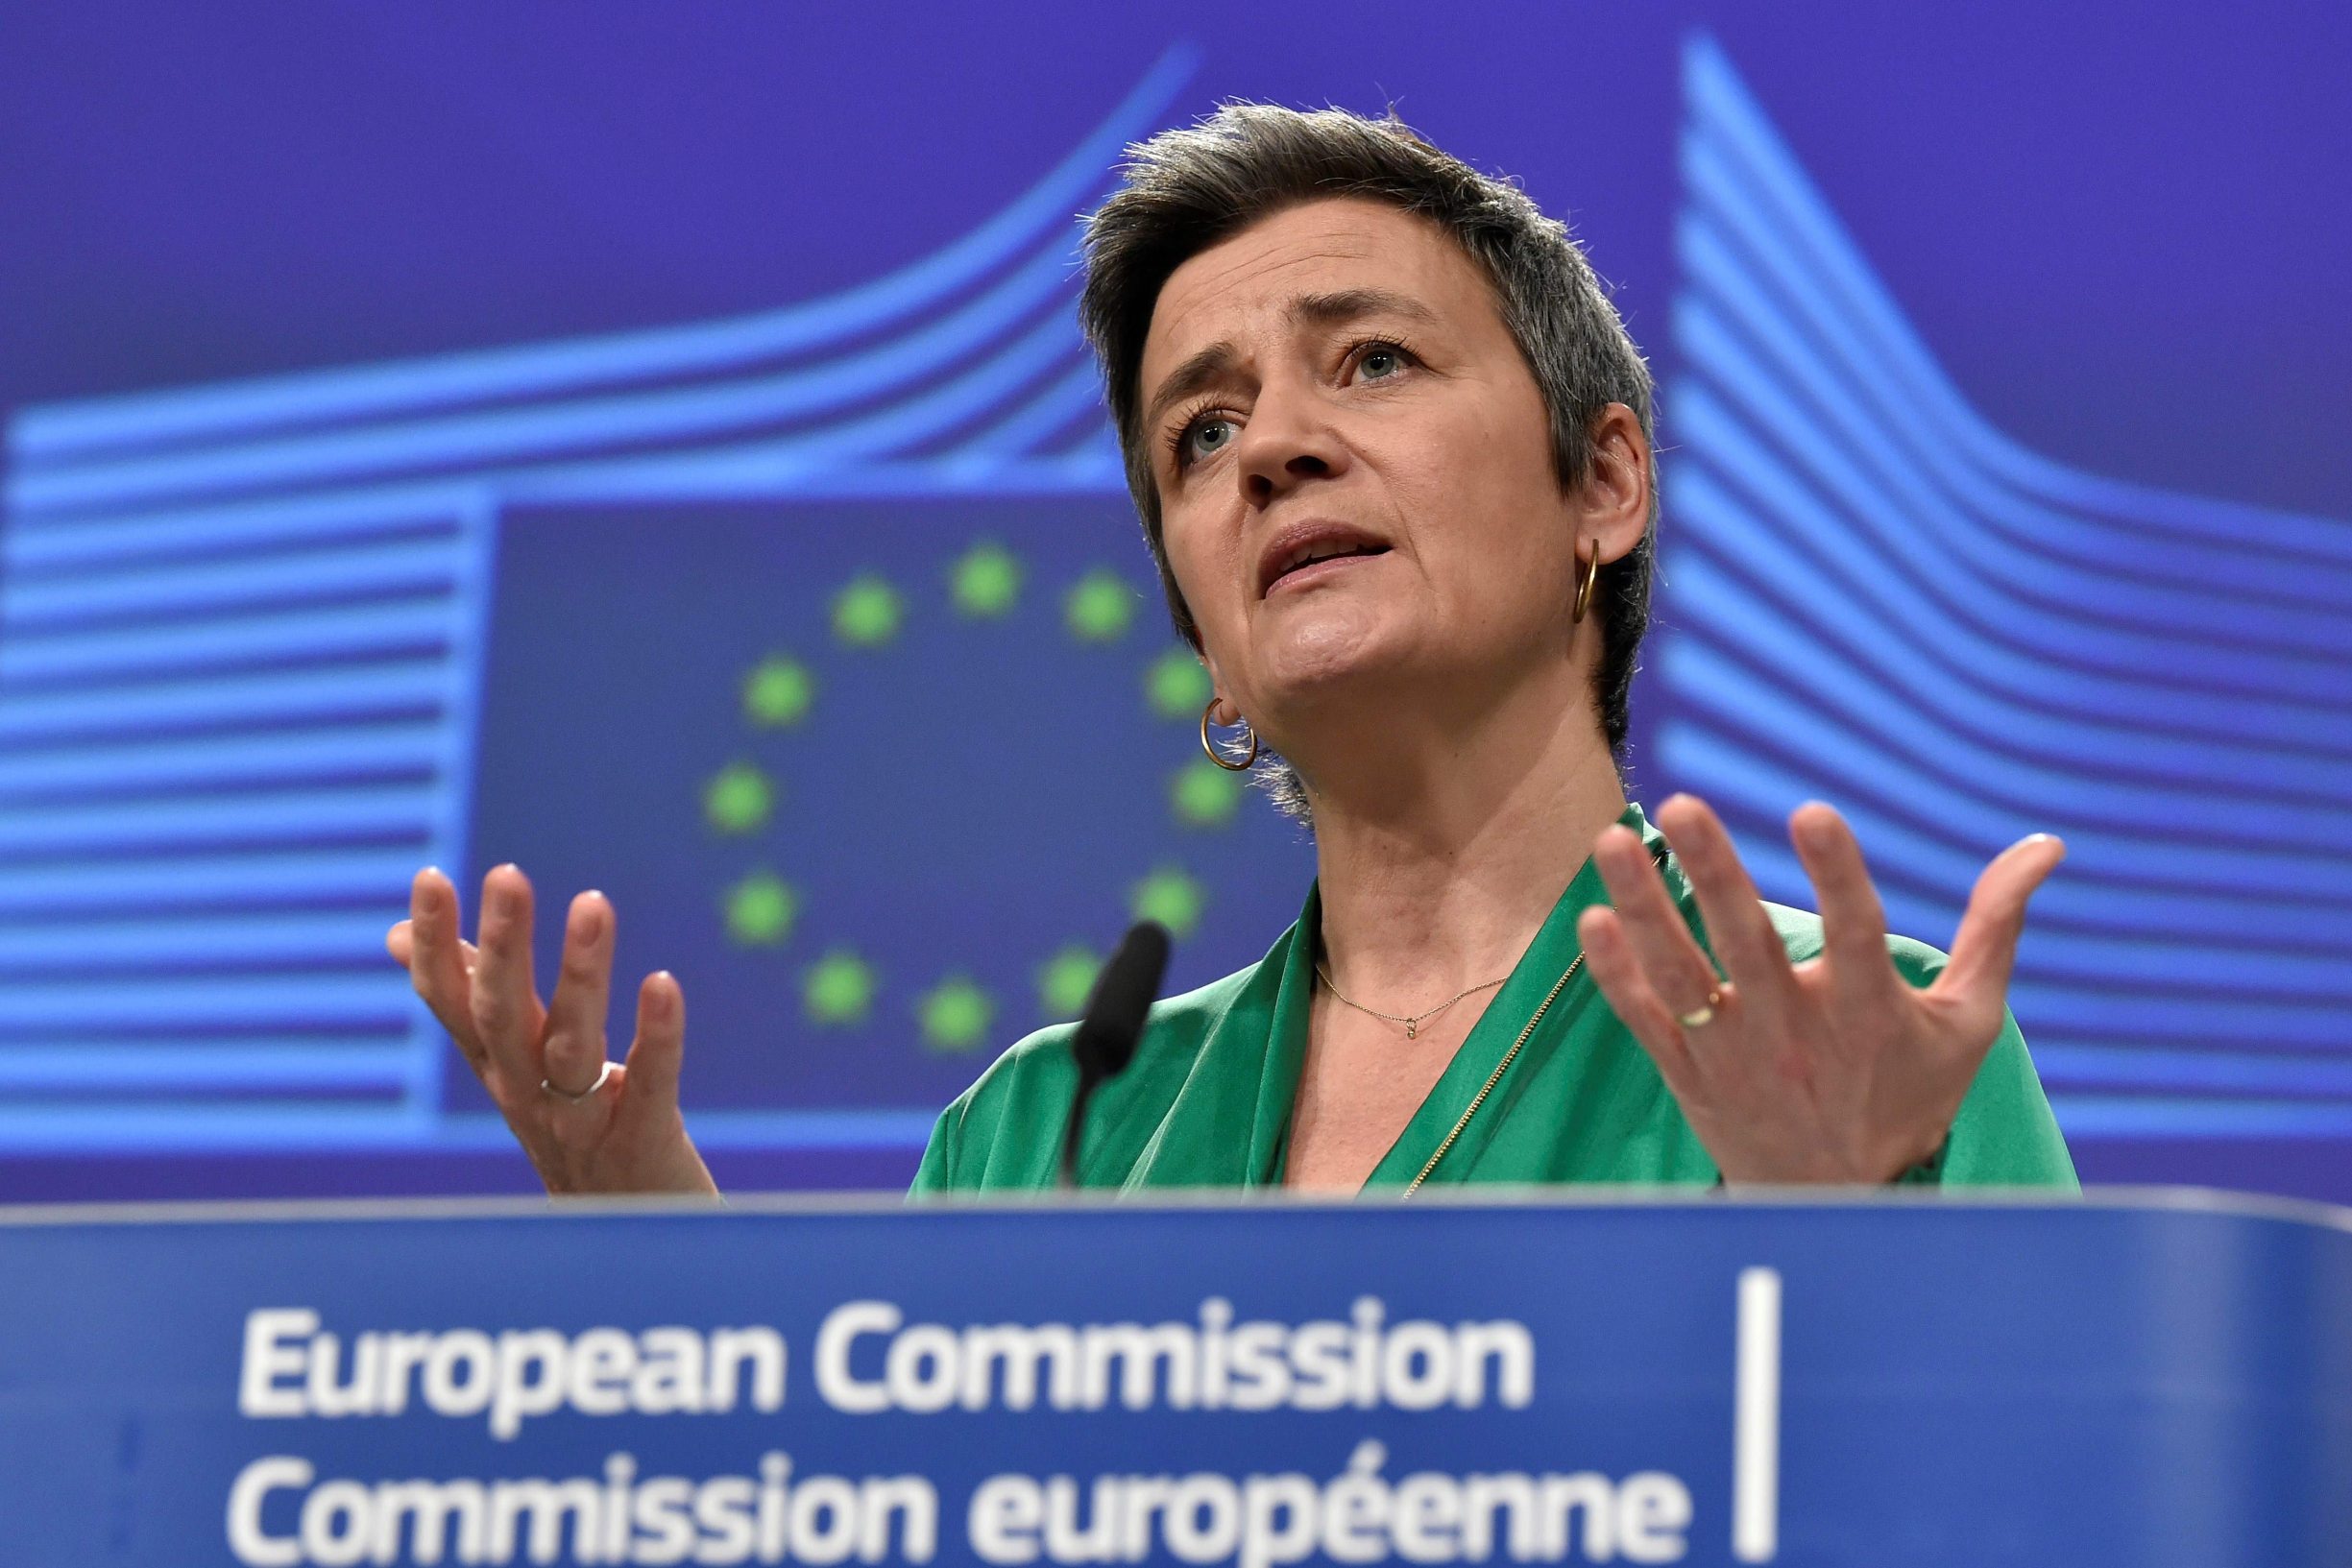 Executive Vice President of the European Commission for a Europe Fit for the Digital Age and European Commissioner for Competition, Margrethe Vestager speaks during a press conference to present the economic response to the Covid-19 crisis at the EU headquarters in Brussels on March 13, 2020. (Photo by JOHN THYS / AFP)